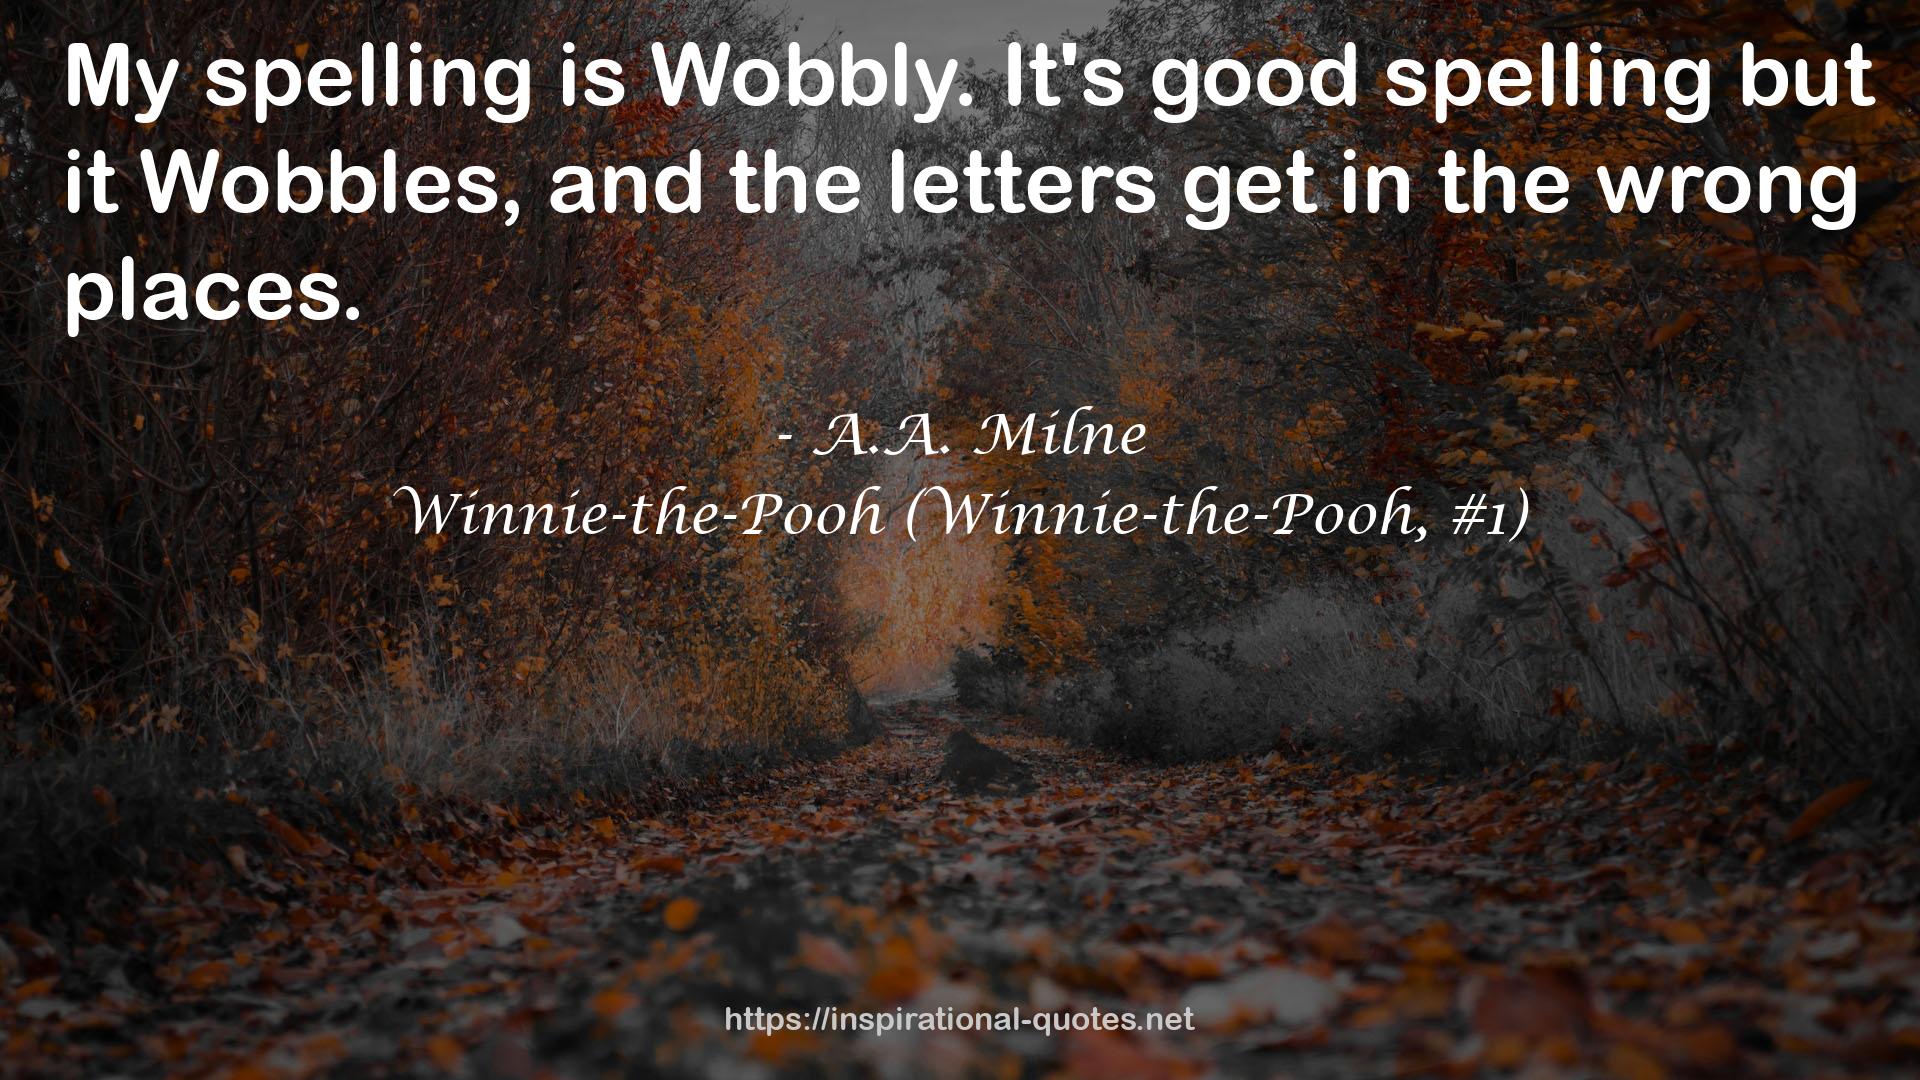 A.A. Milne QUOTES